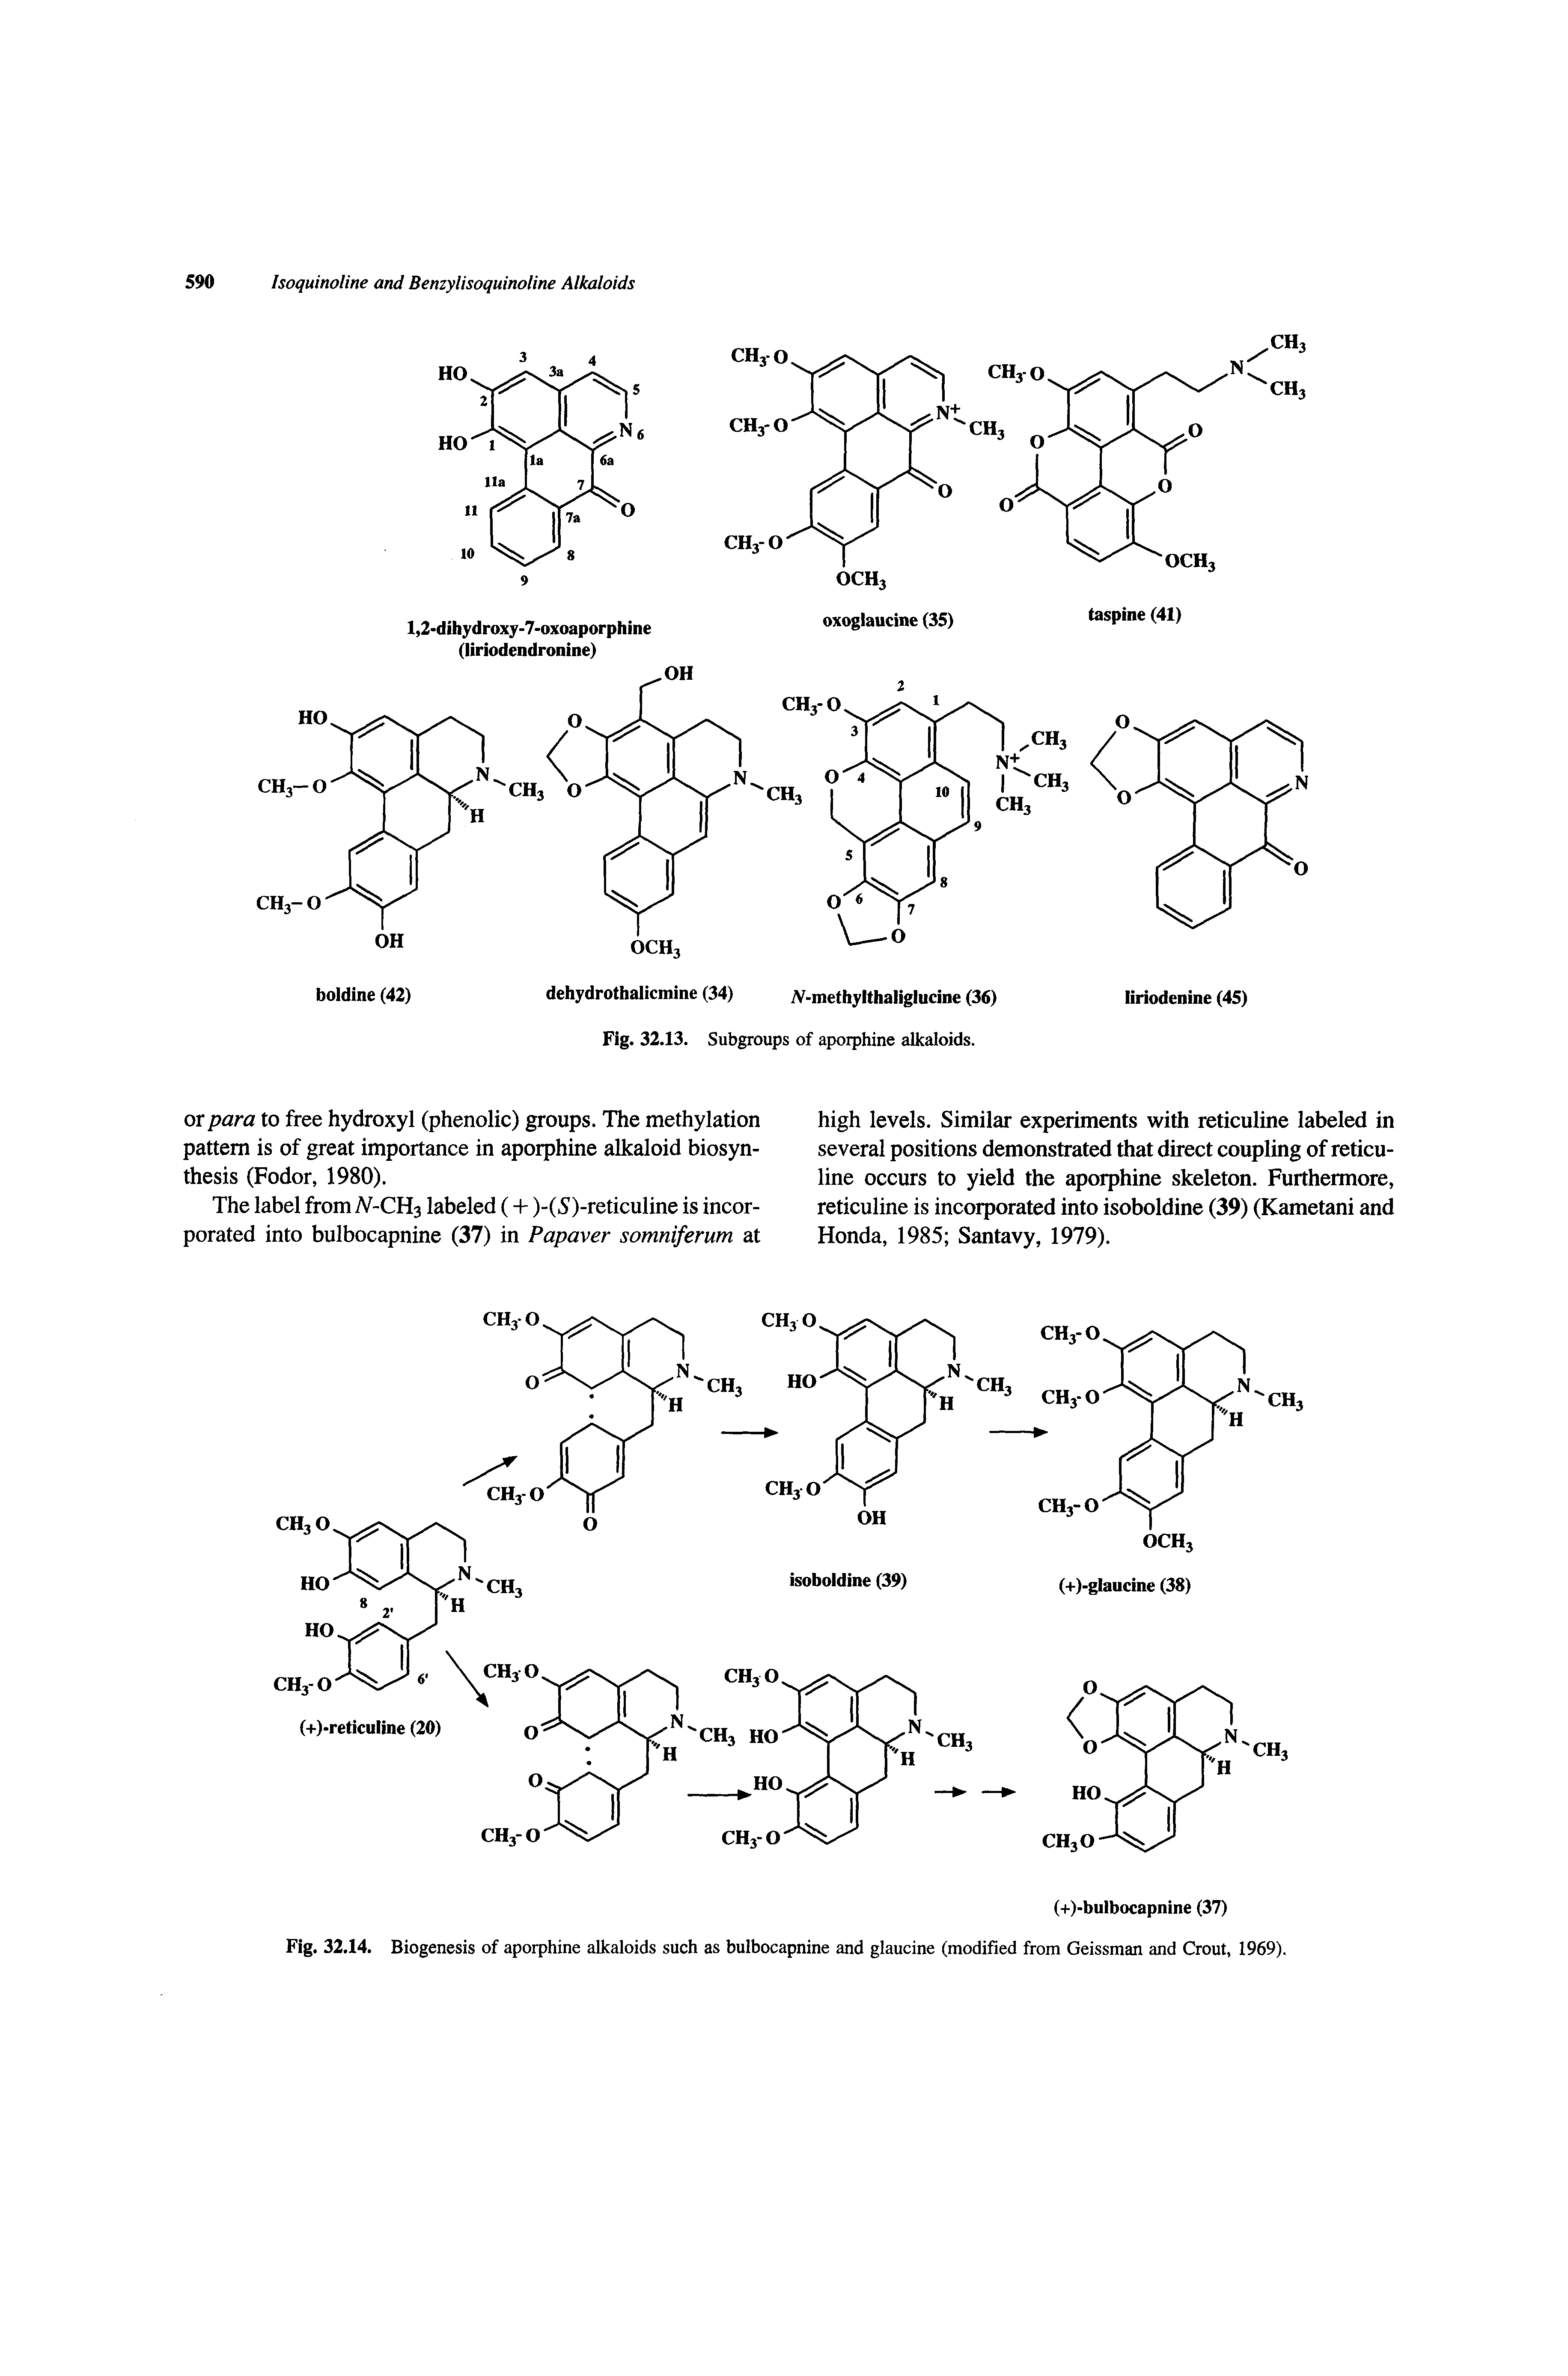 Fig. 32.14. Biogenesis of aporphine alkaloids such as bulbocapnine and glaucine (modified from Geissman and Grout, 1969).